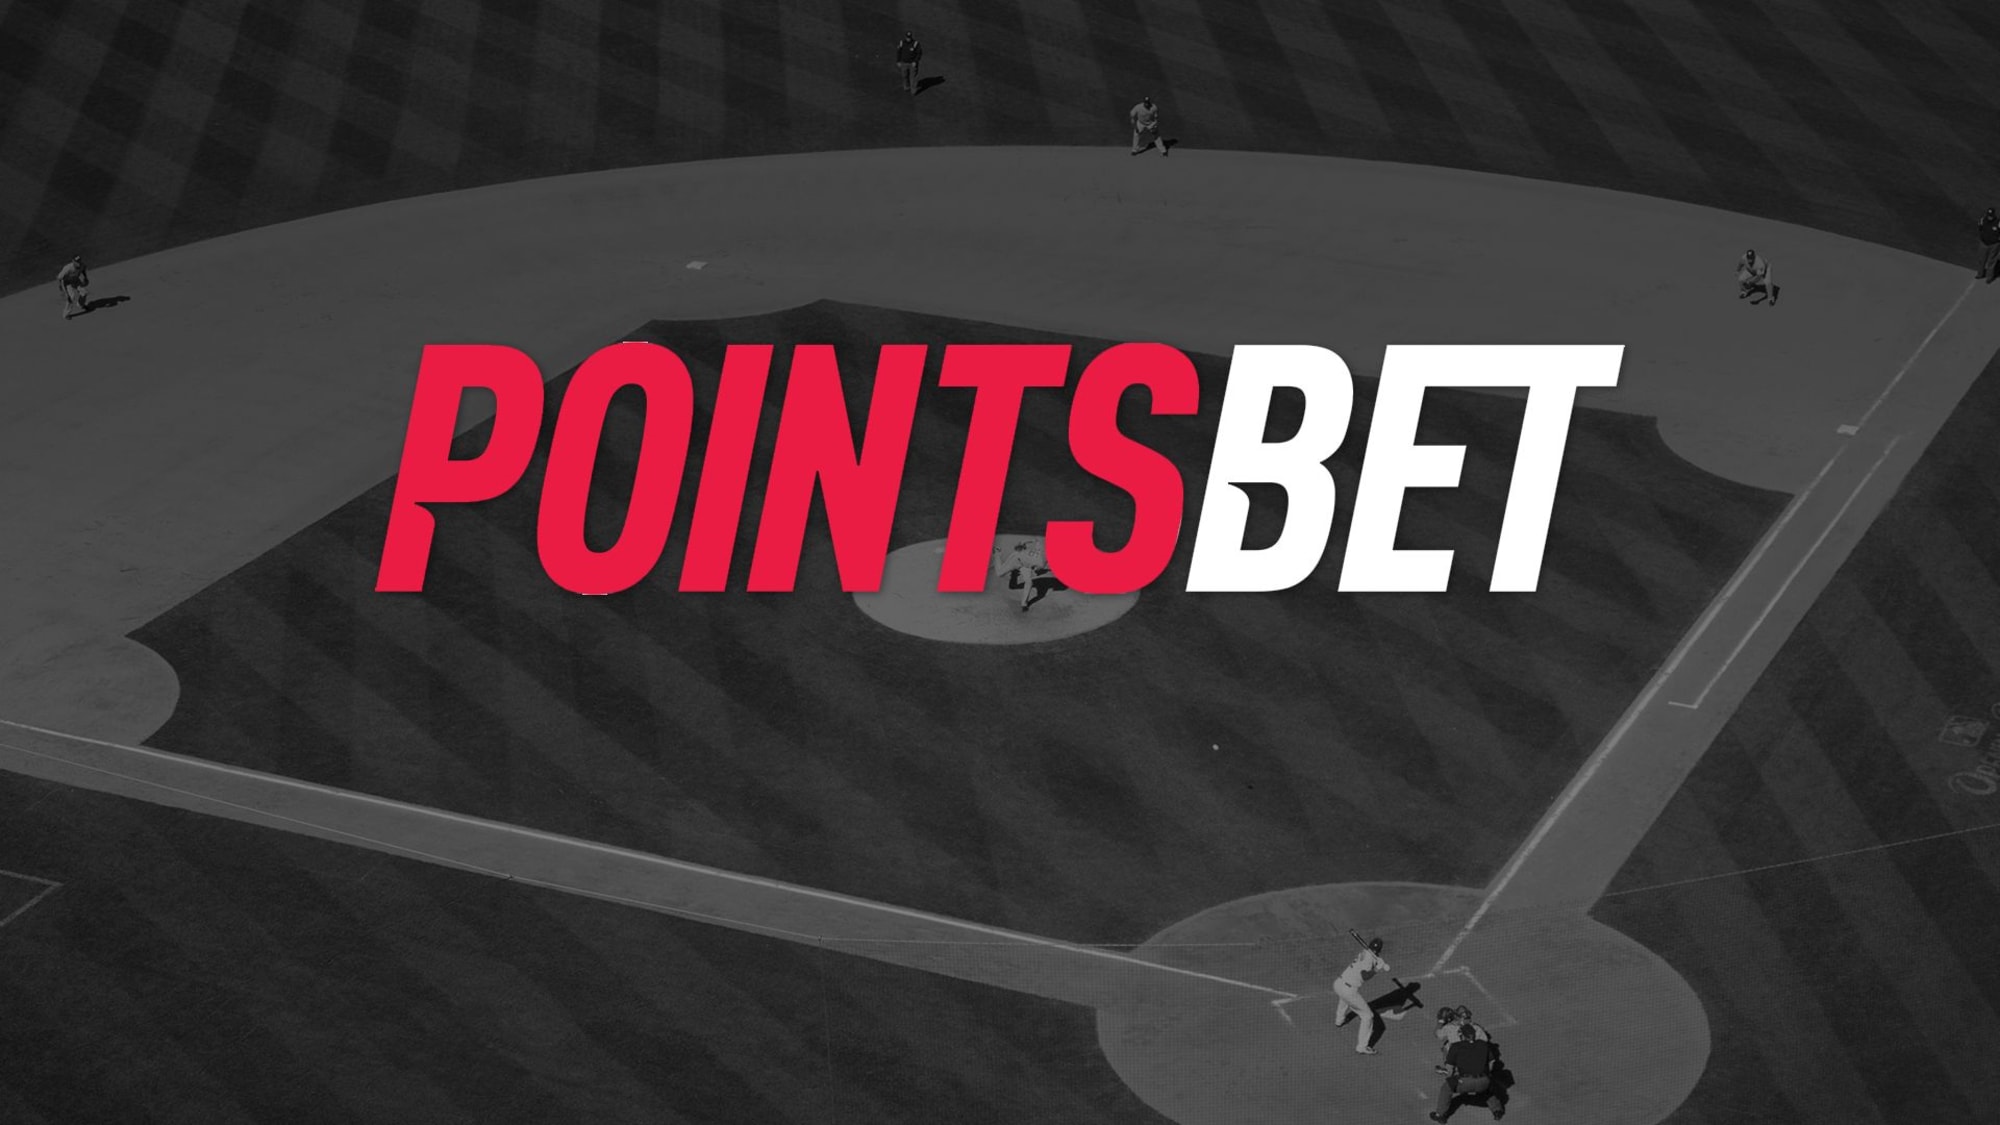 PointsBet New York Promo: FIVE $100 Bonus Bets to Back the Yankees or Mets!